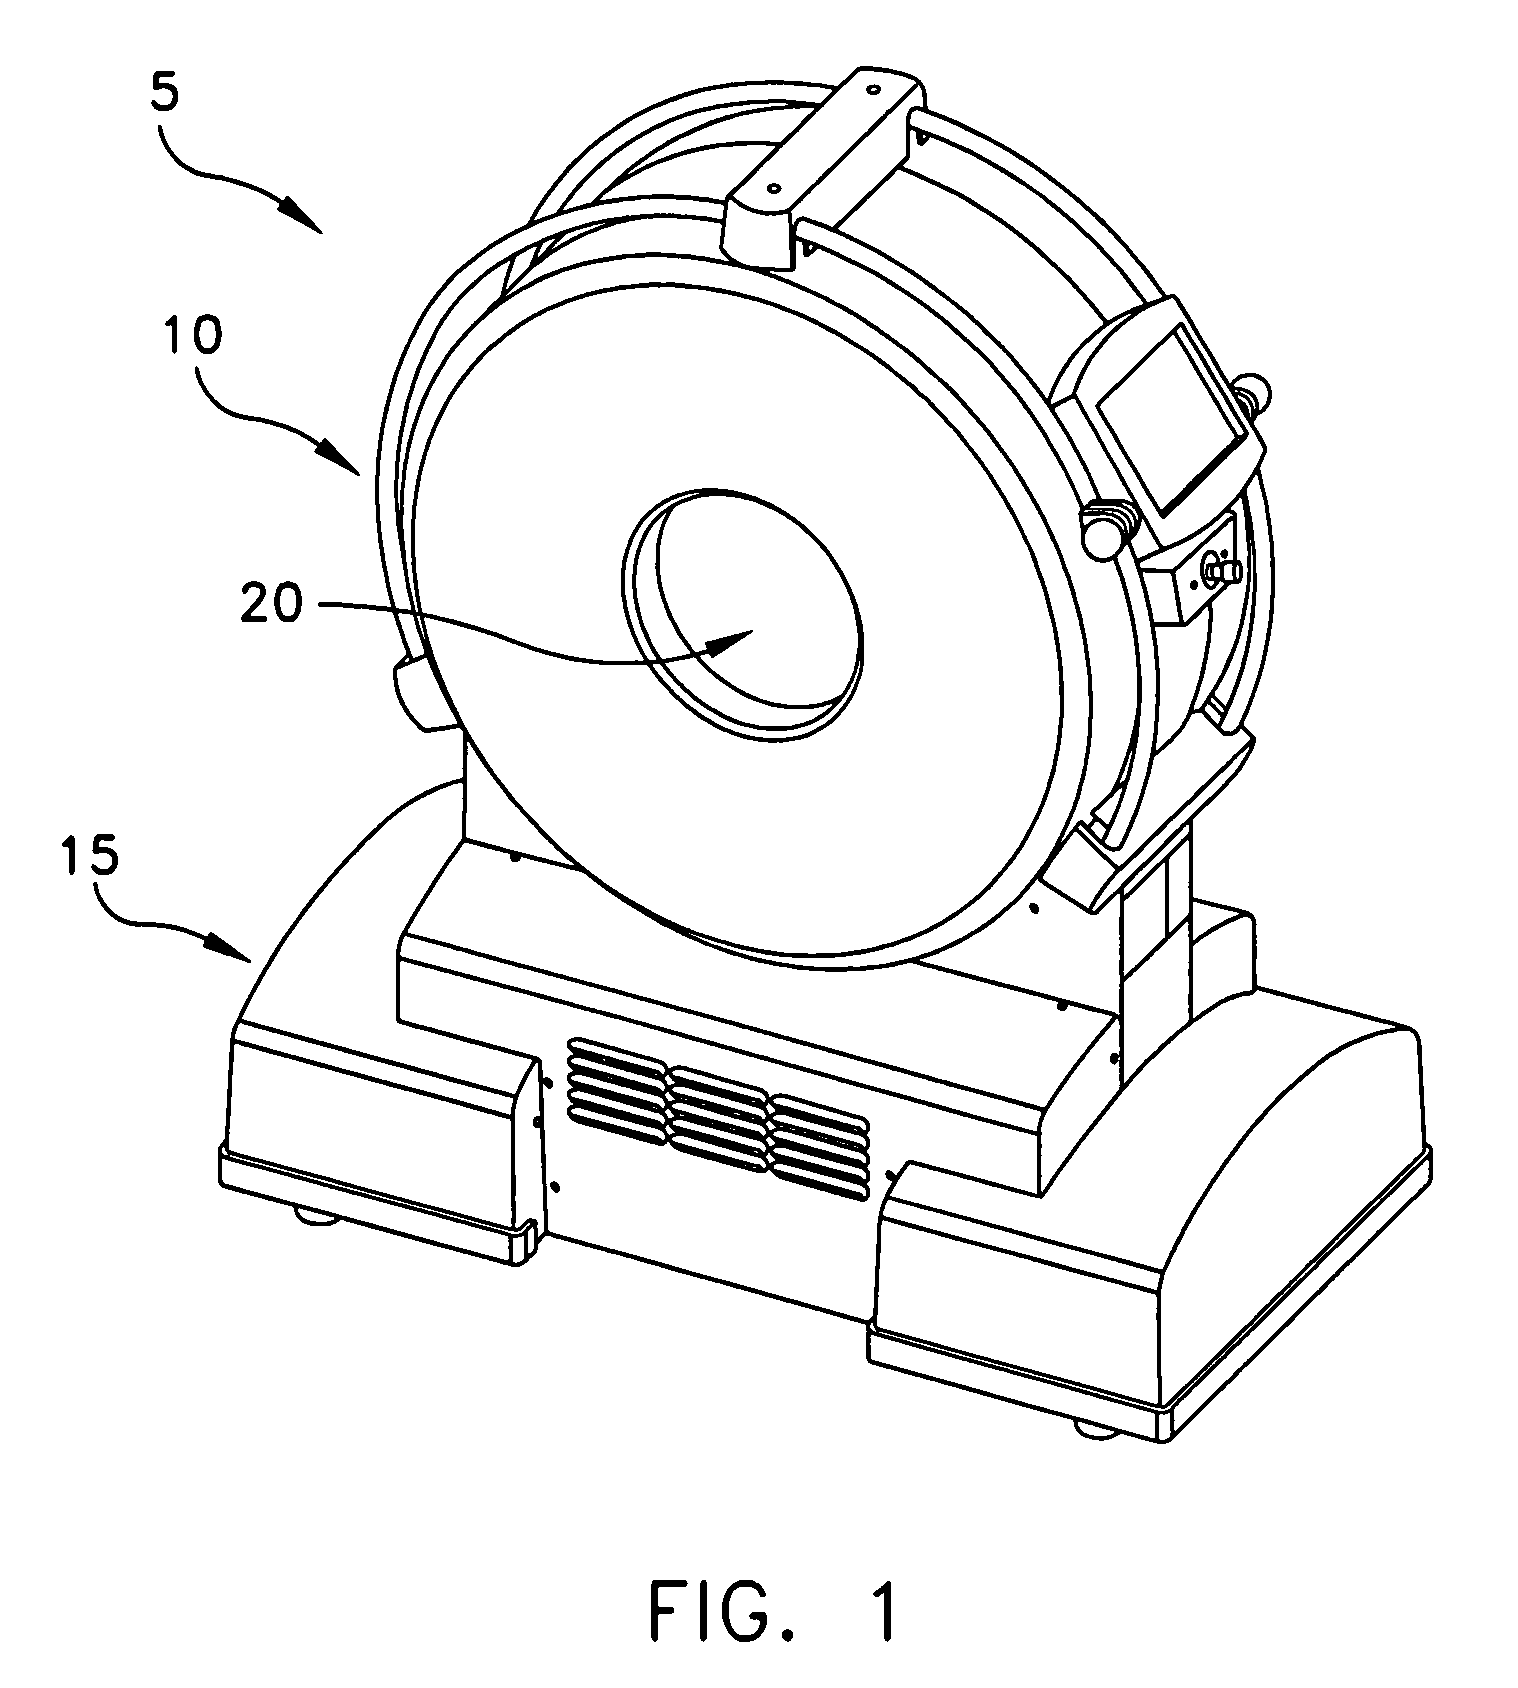 Computerized tomography (CT) imaging system with monoblock X-ray tube assembly